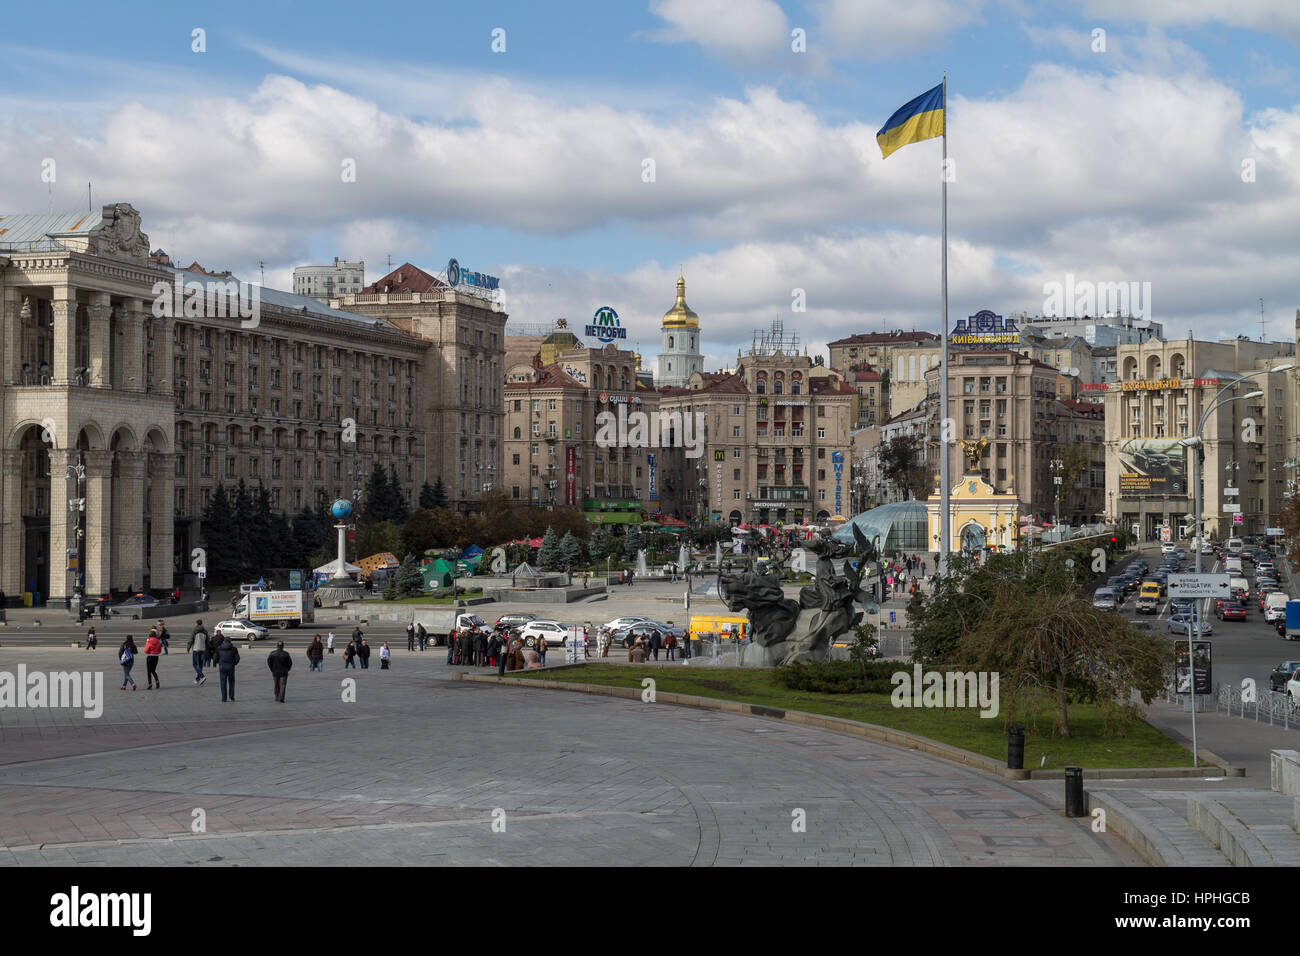 The Maidan in Kiev, Ukraine a month before the 2013 revolution Stock Photo